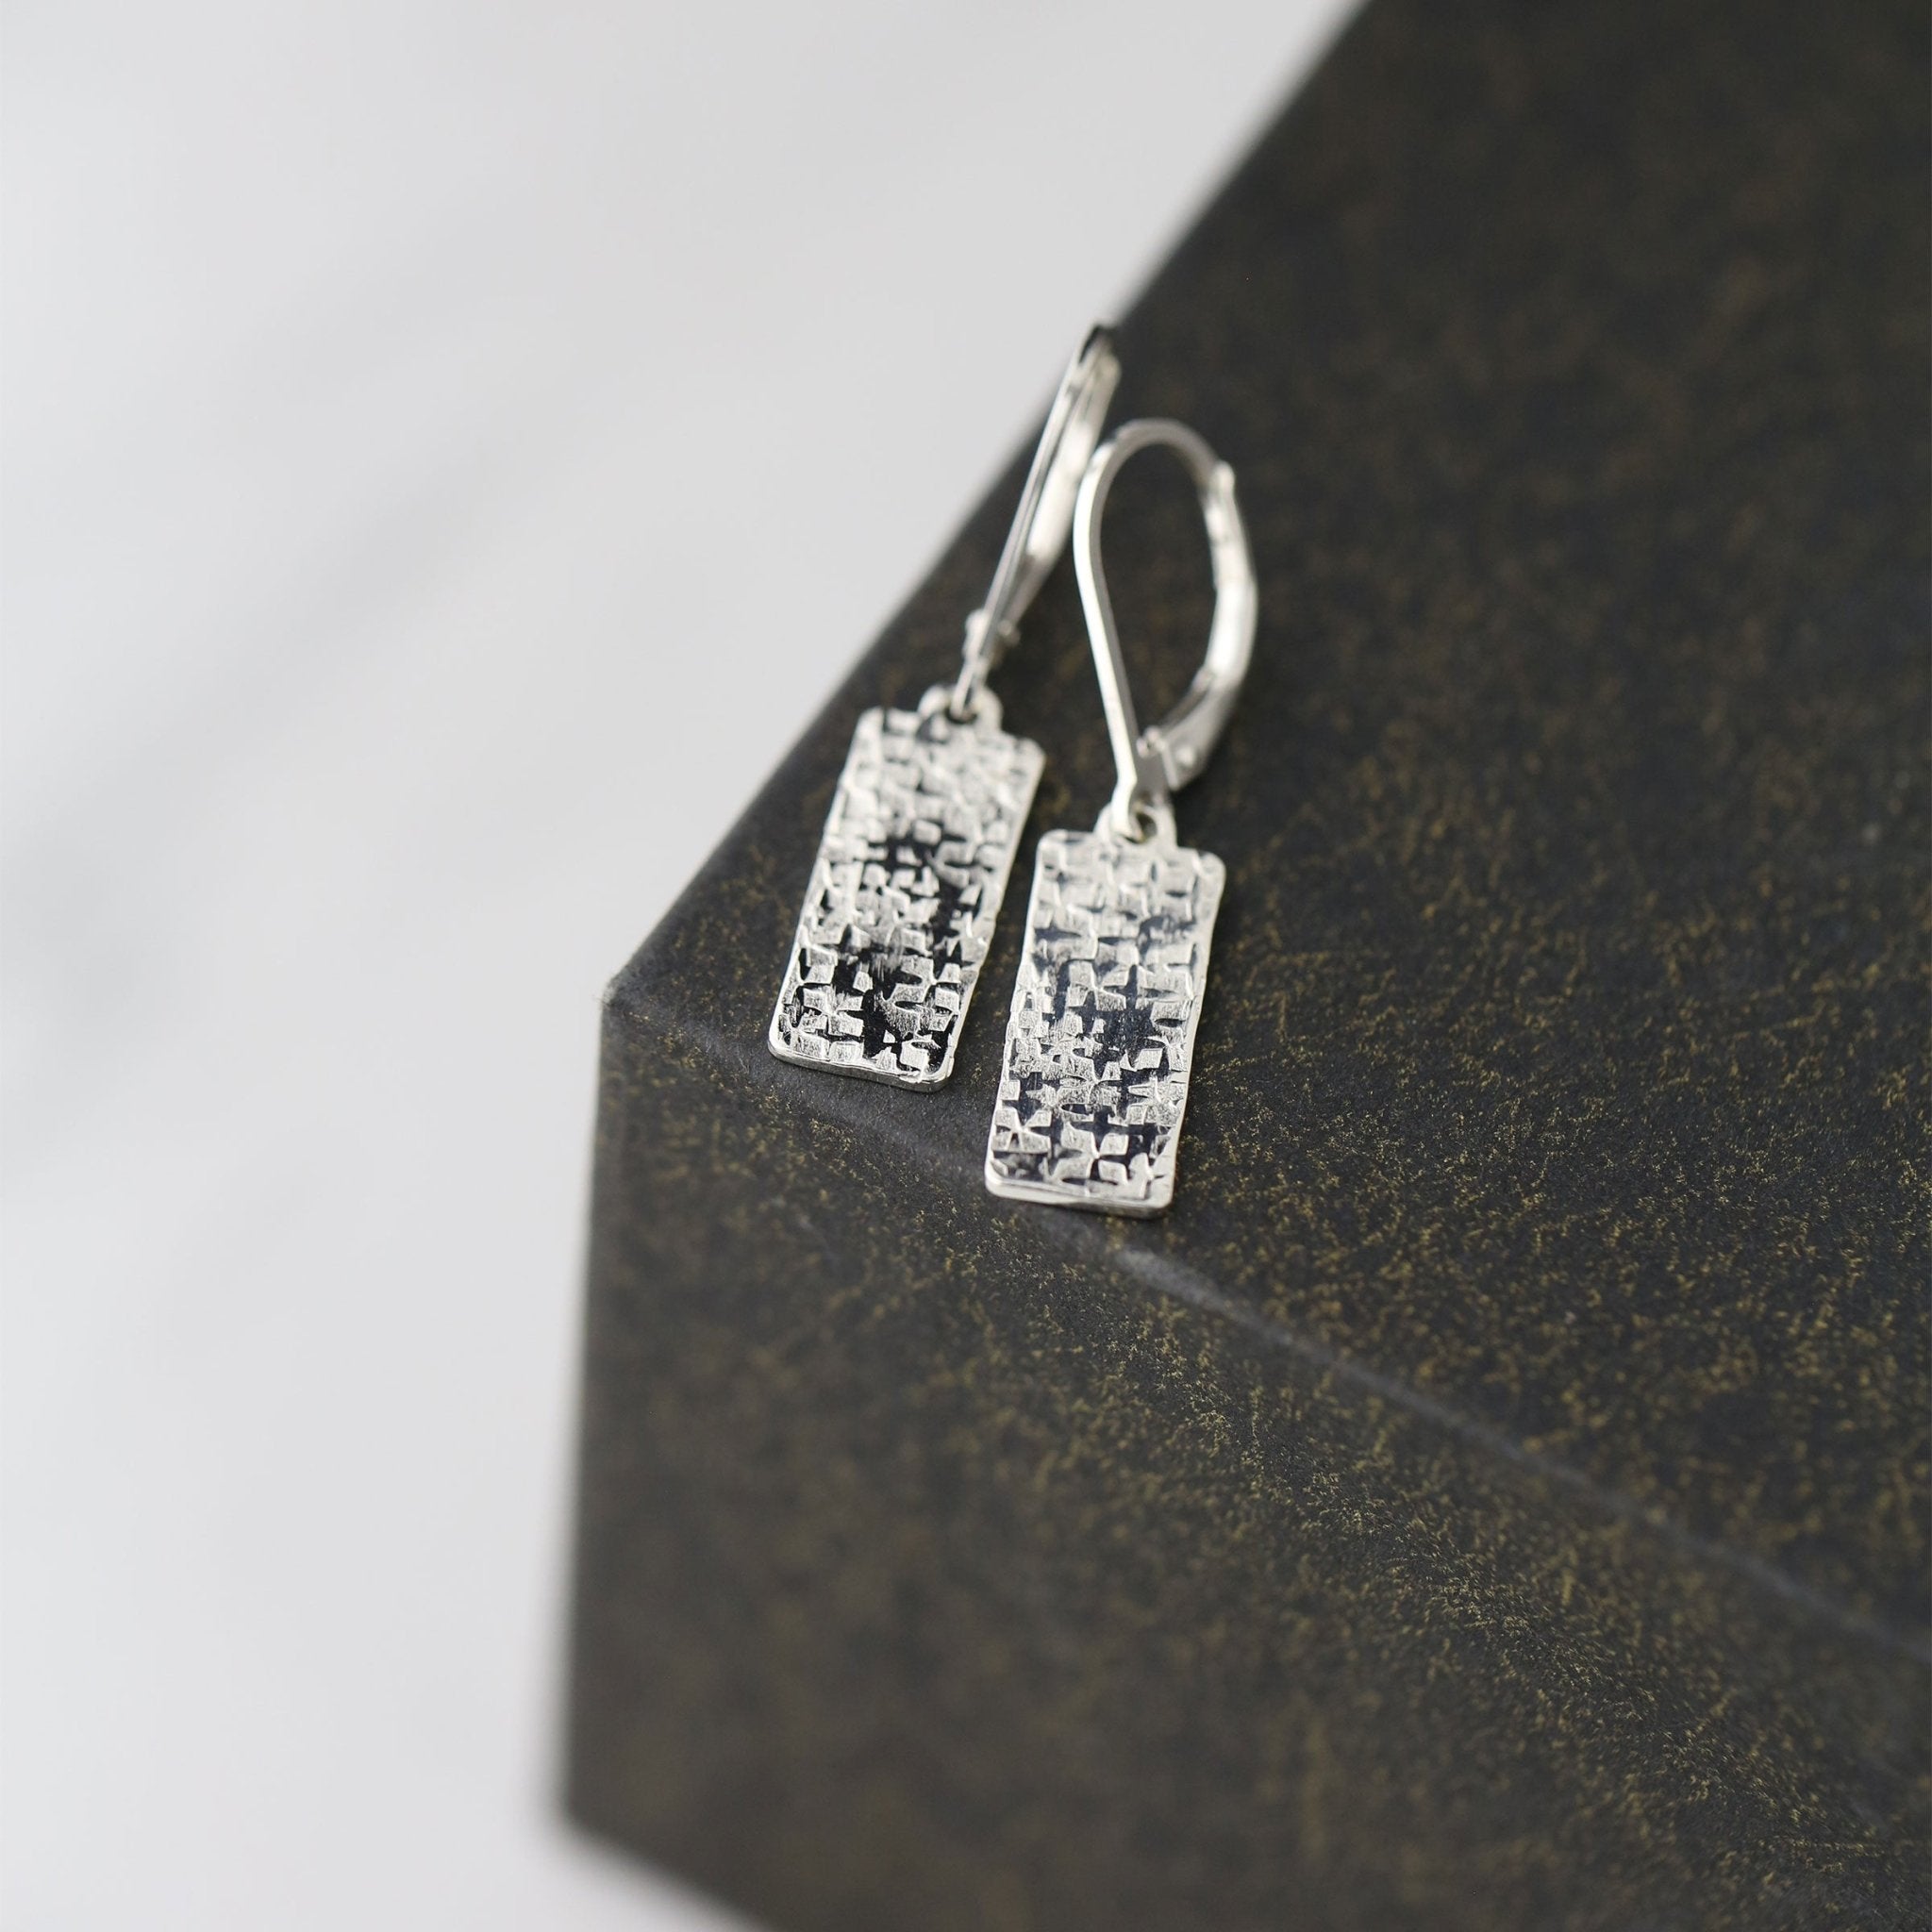 Raw Silk Textured Silver Tag Lever-back Earrings handmade by Burnish